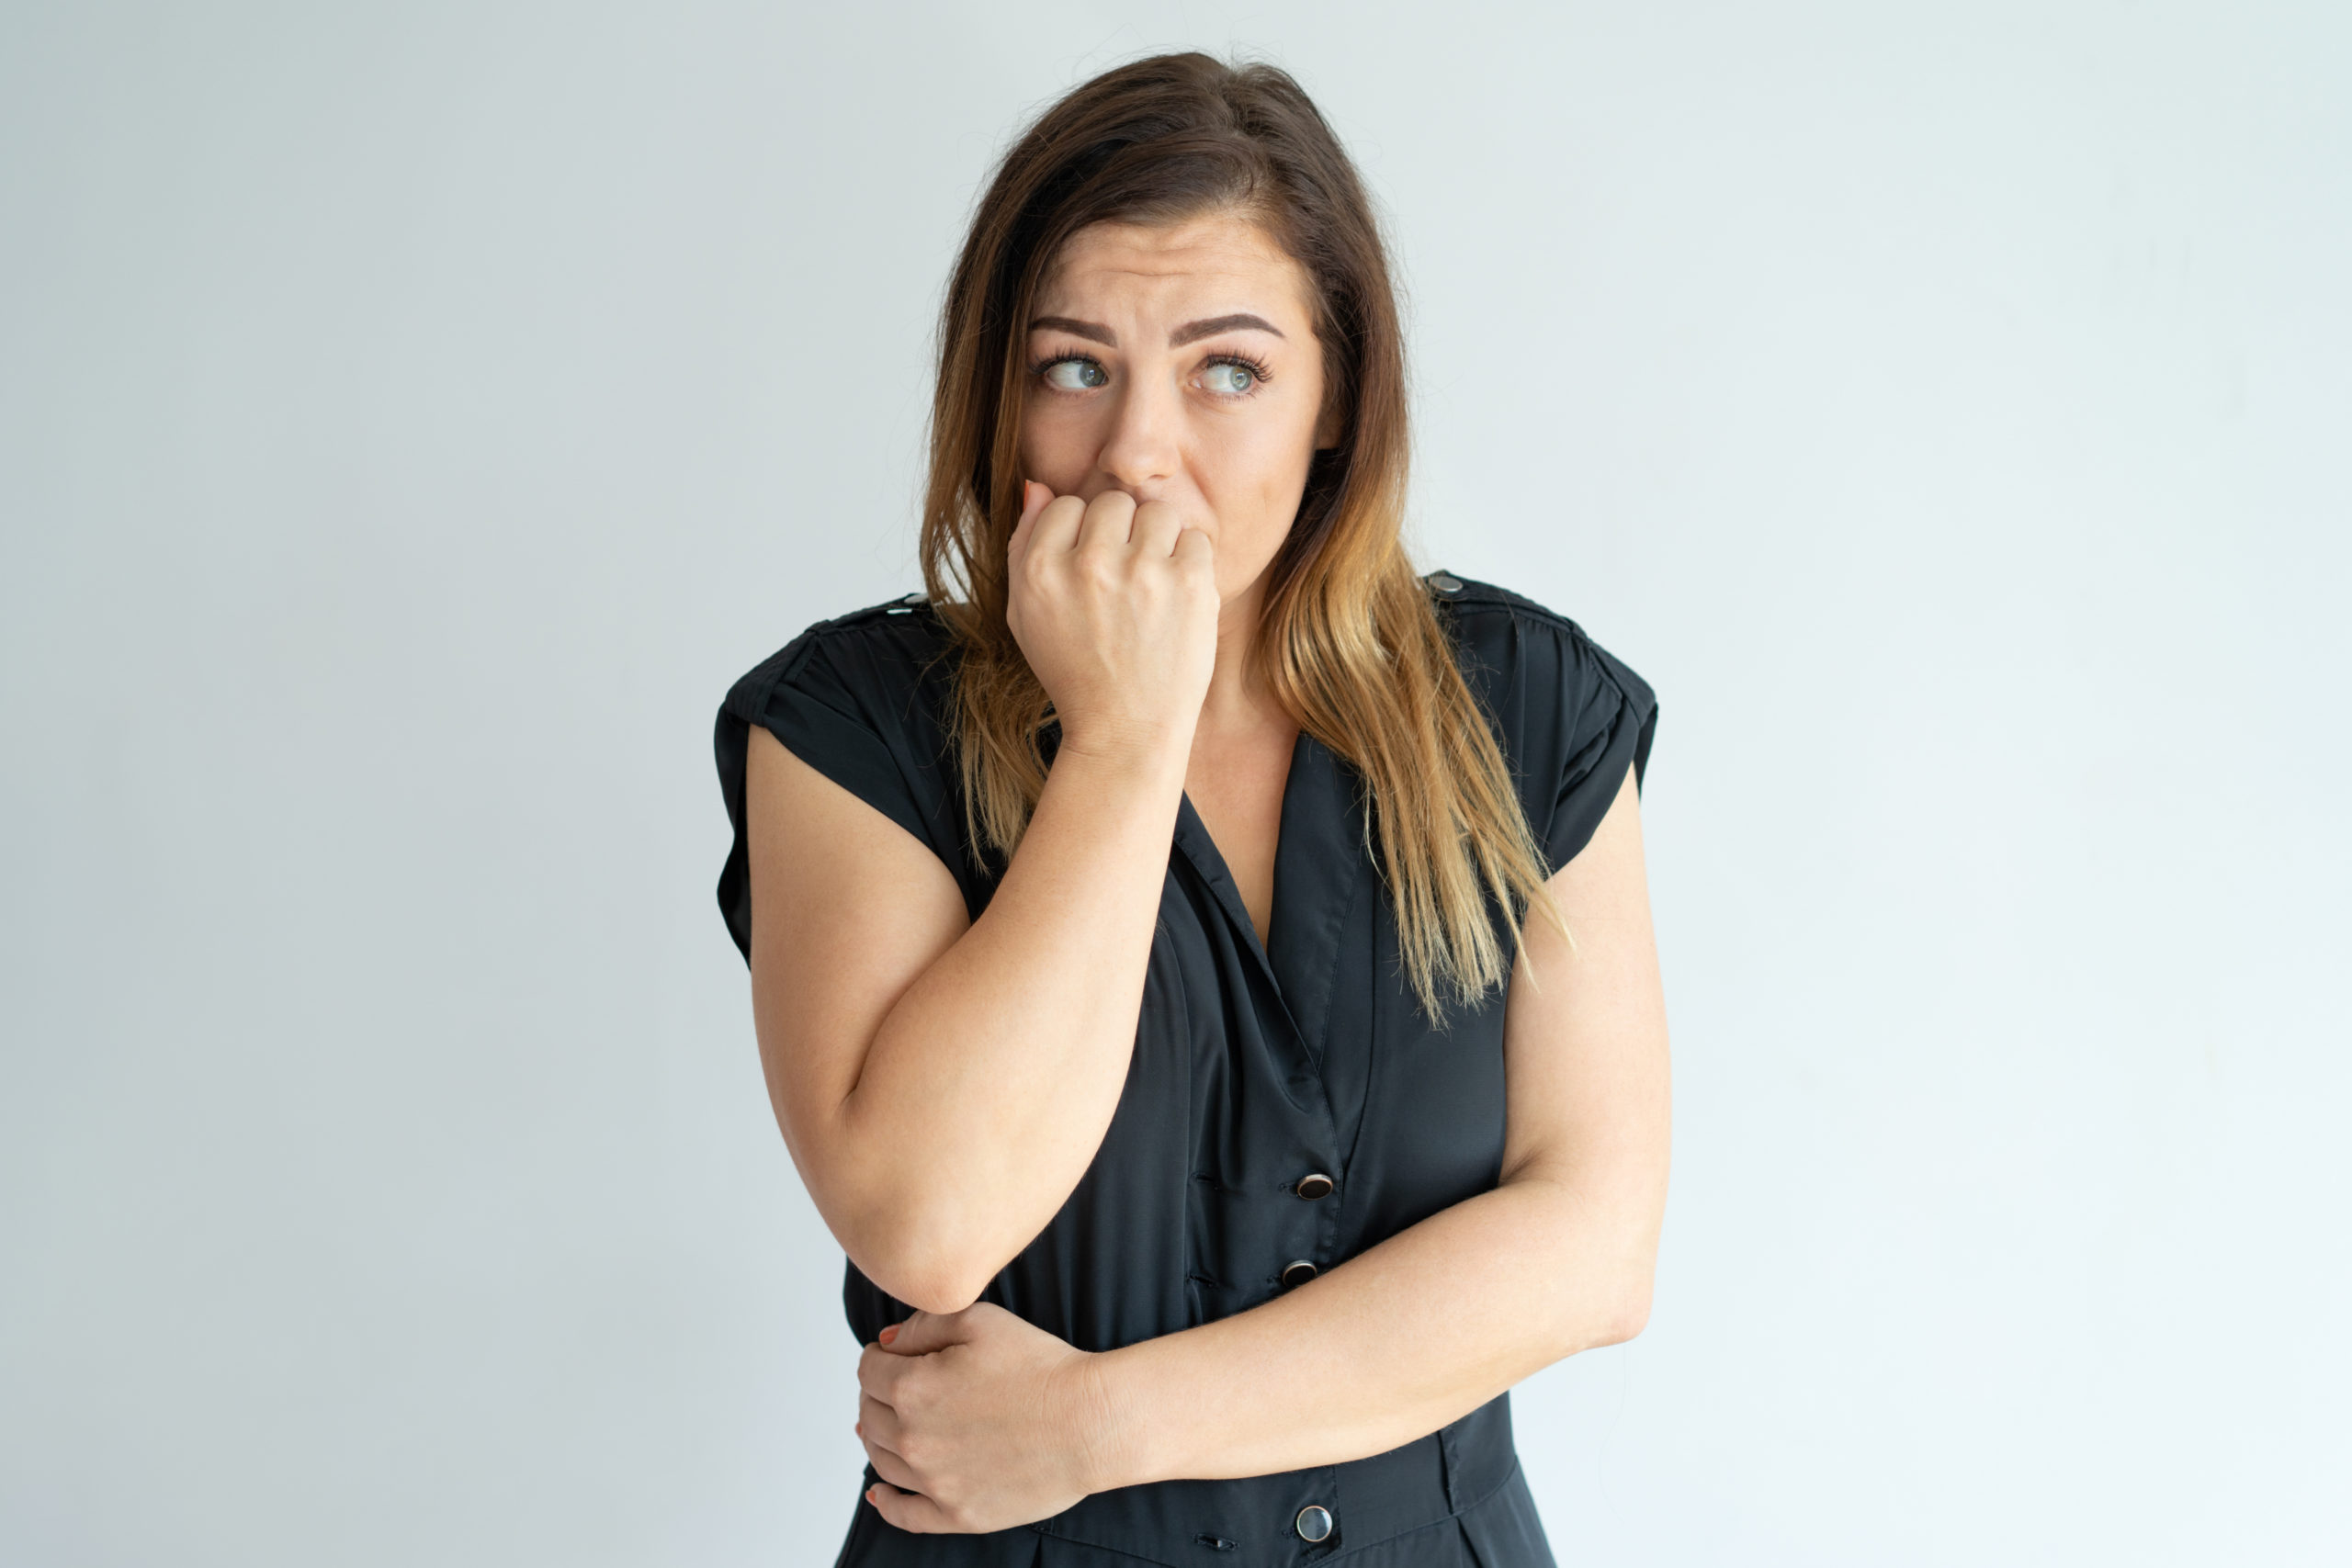 Dental Anxiety: It’s Okay to be Scared of the Dentist